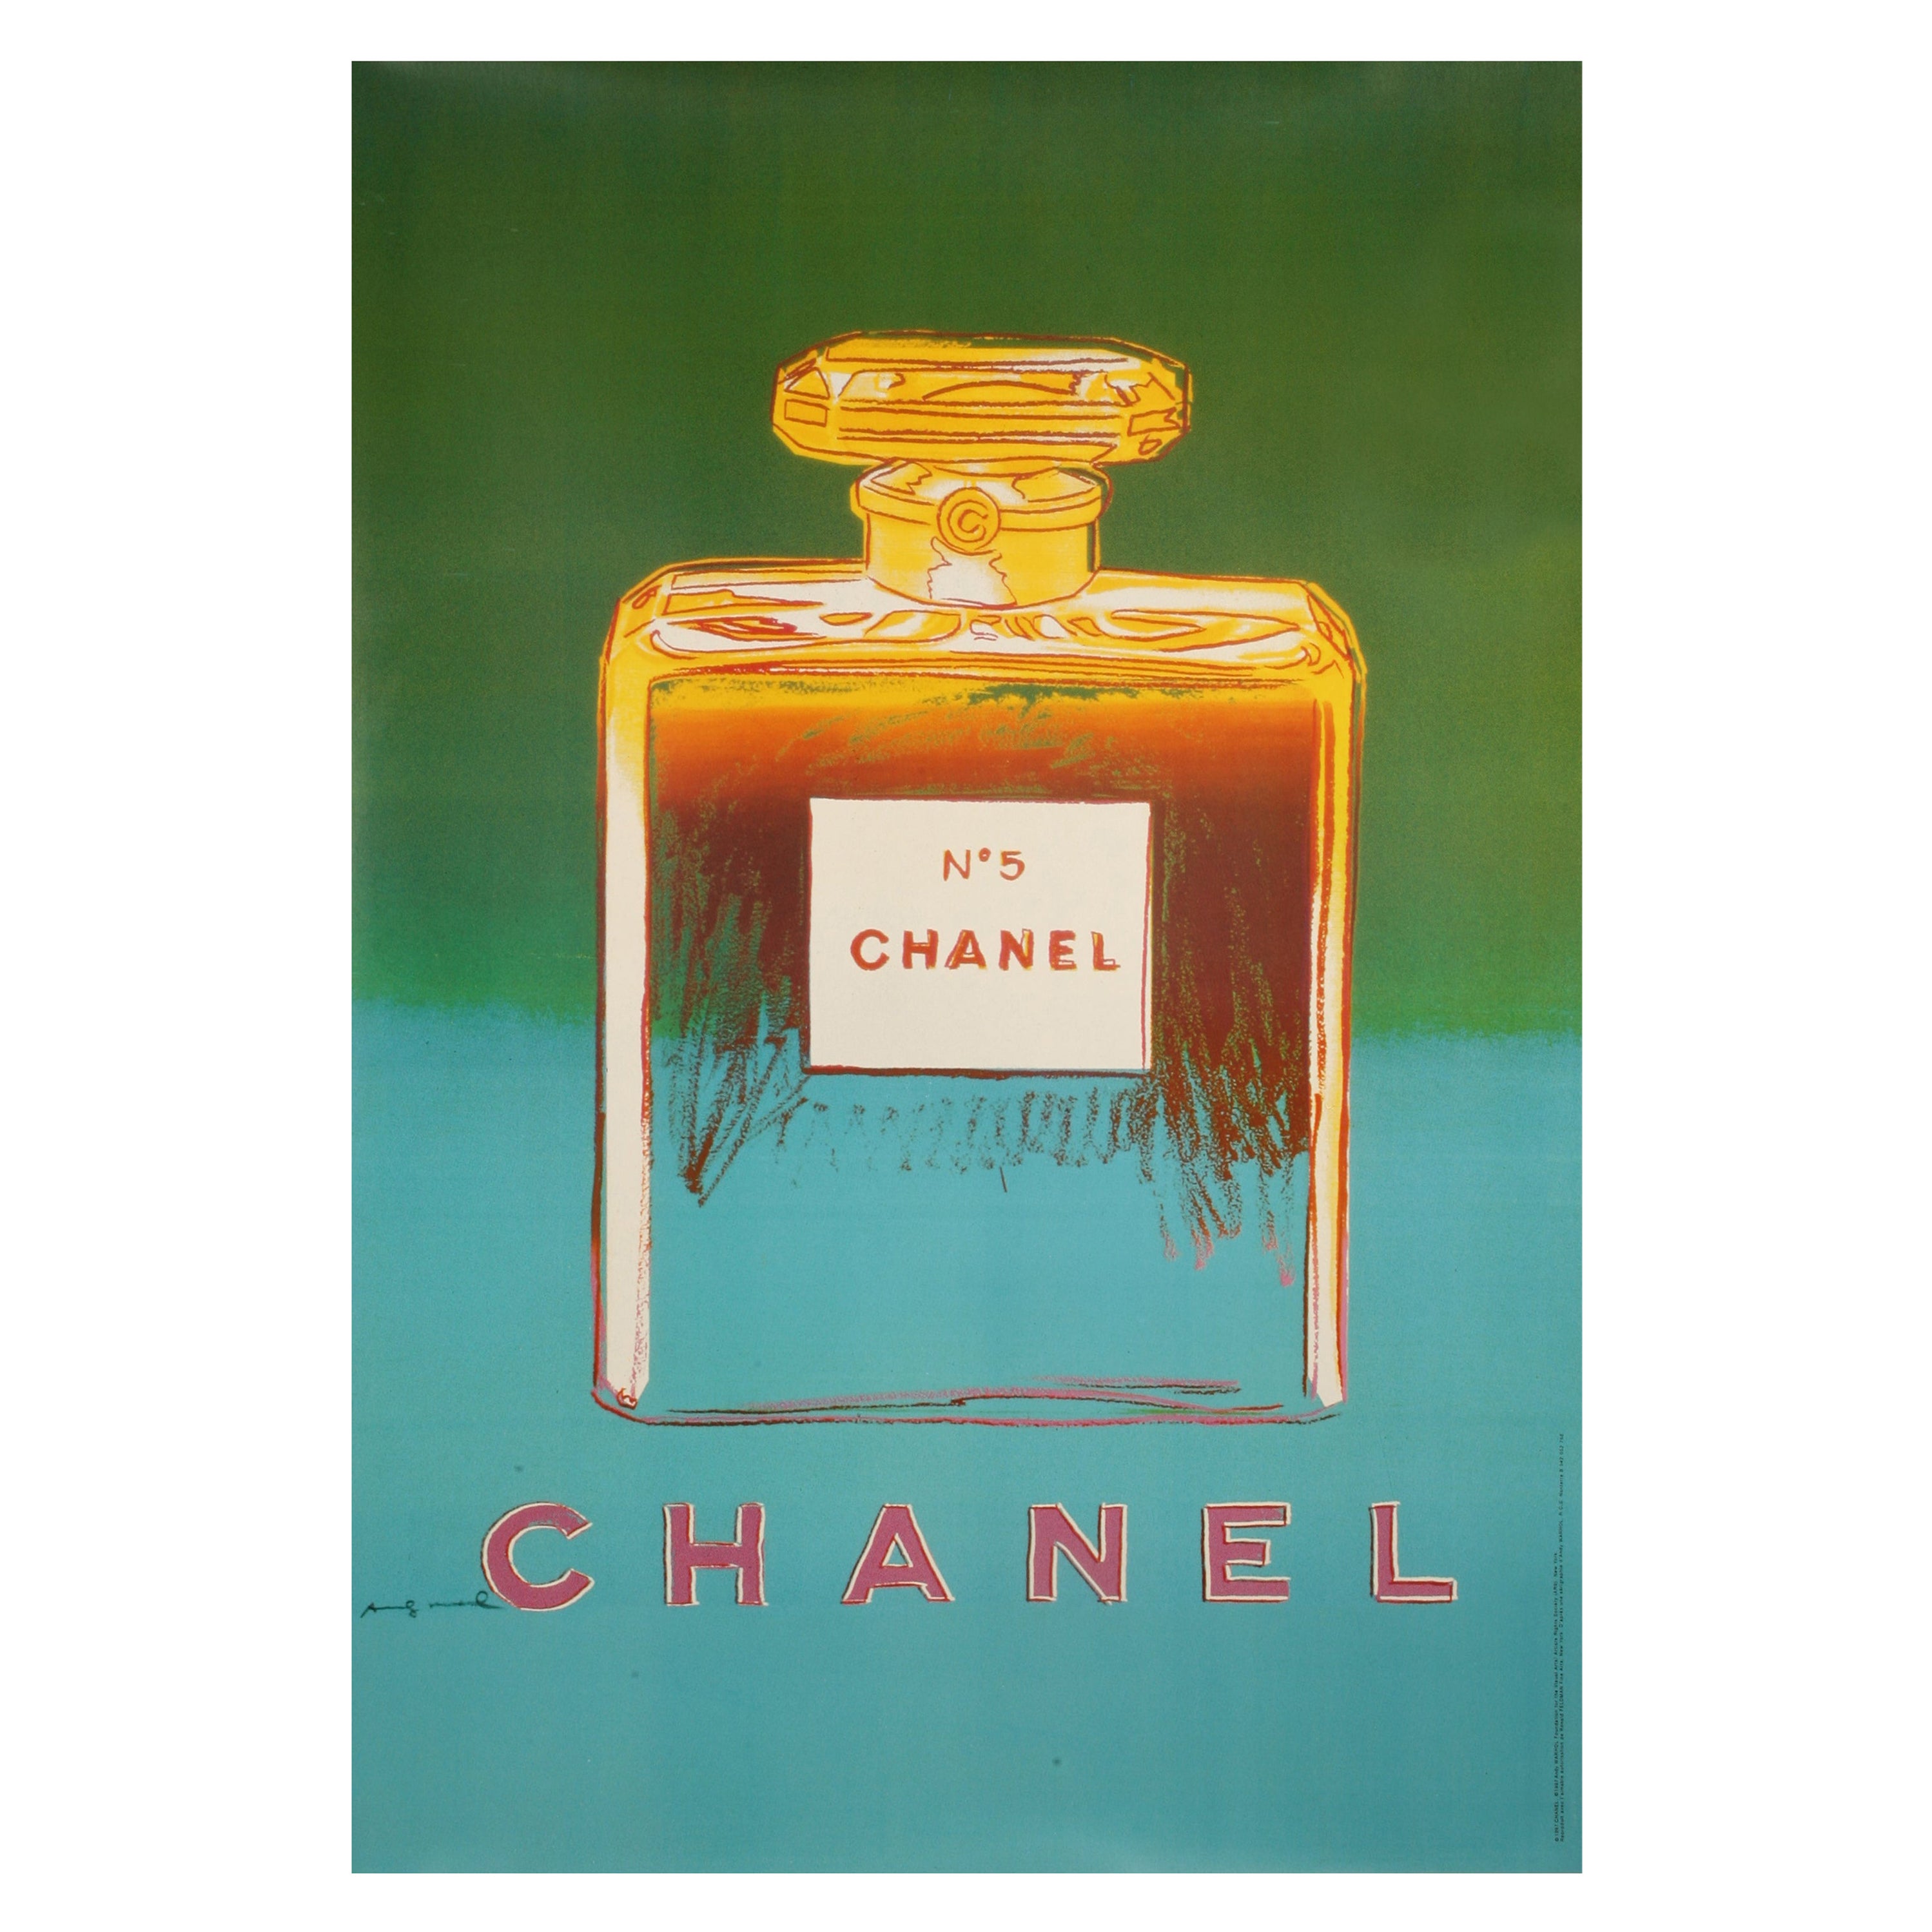 Andy Warhol Chanel Poster - 5 For Sale on 1stDibs